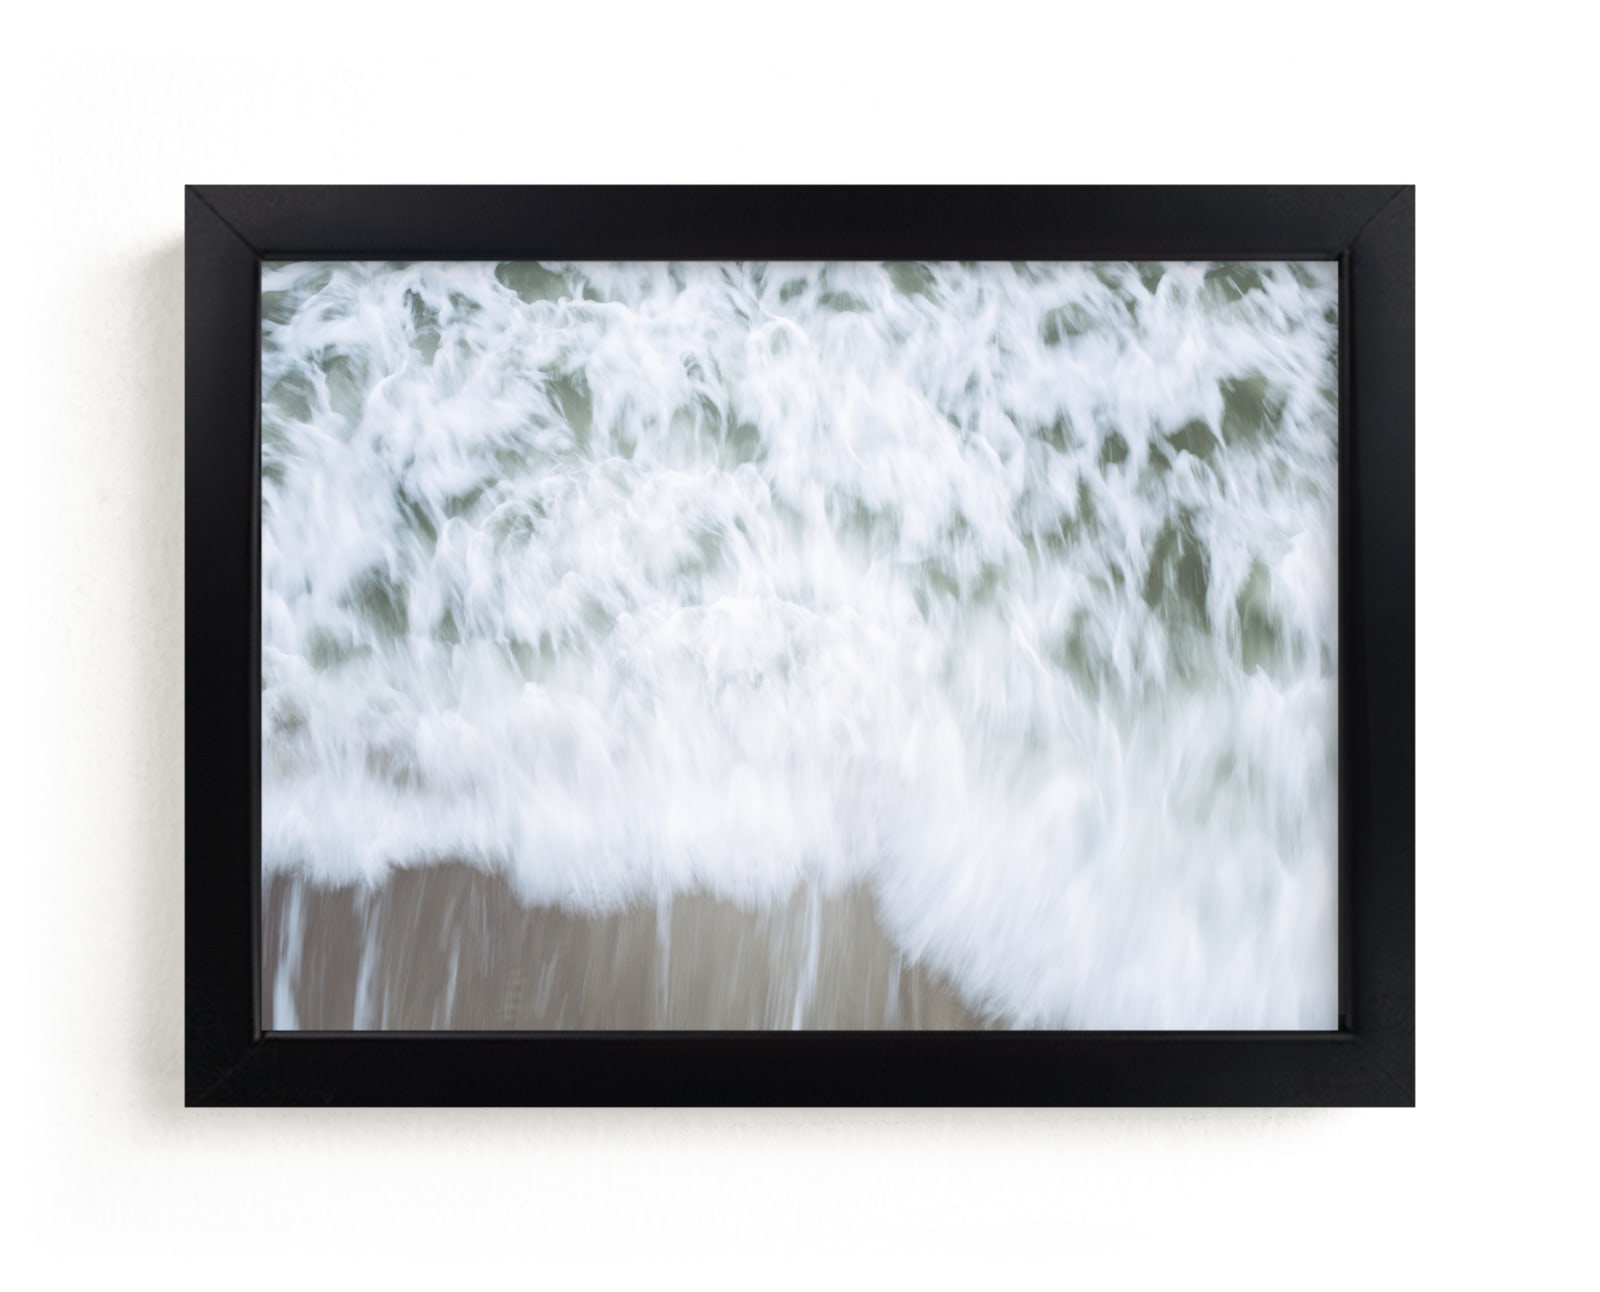 "JELLYFISH II" by Lying on the grass in beautiful frame options and a variety of sizes.